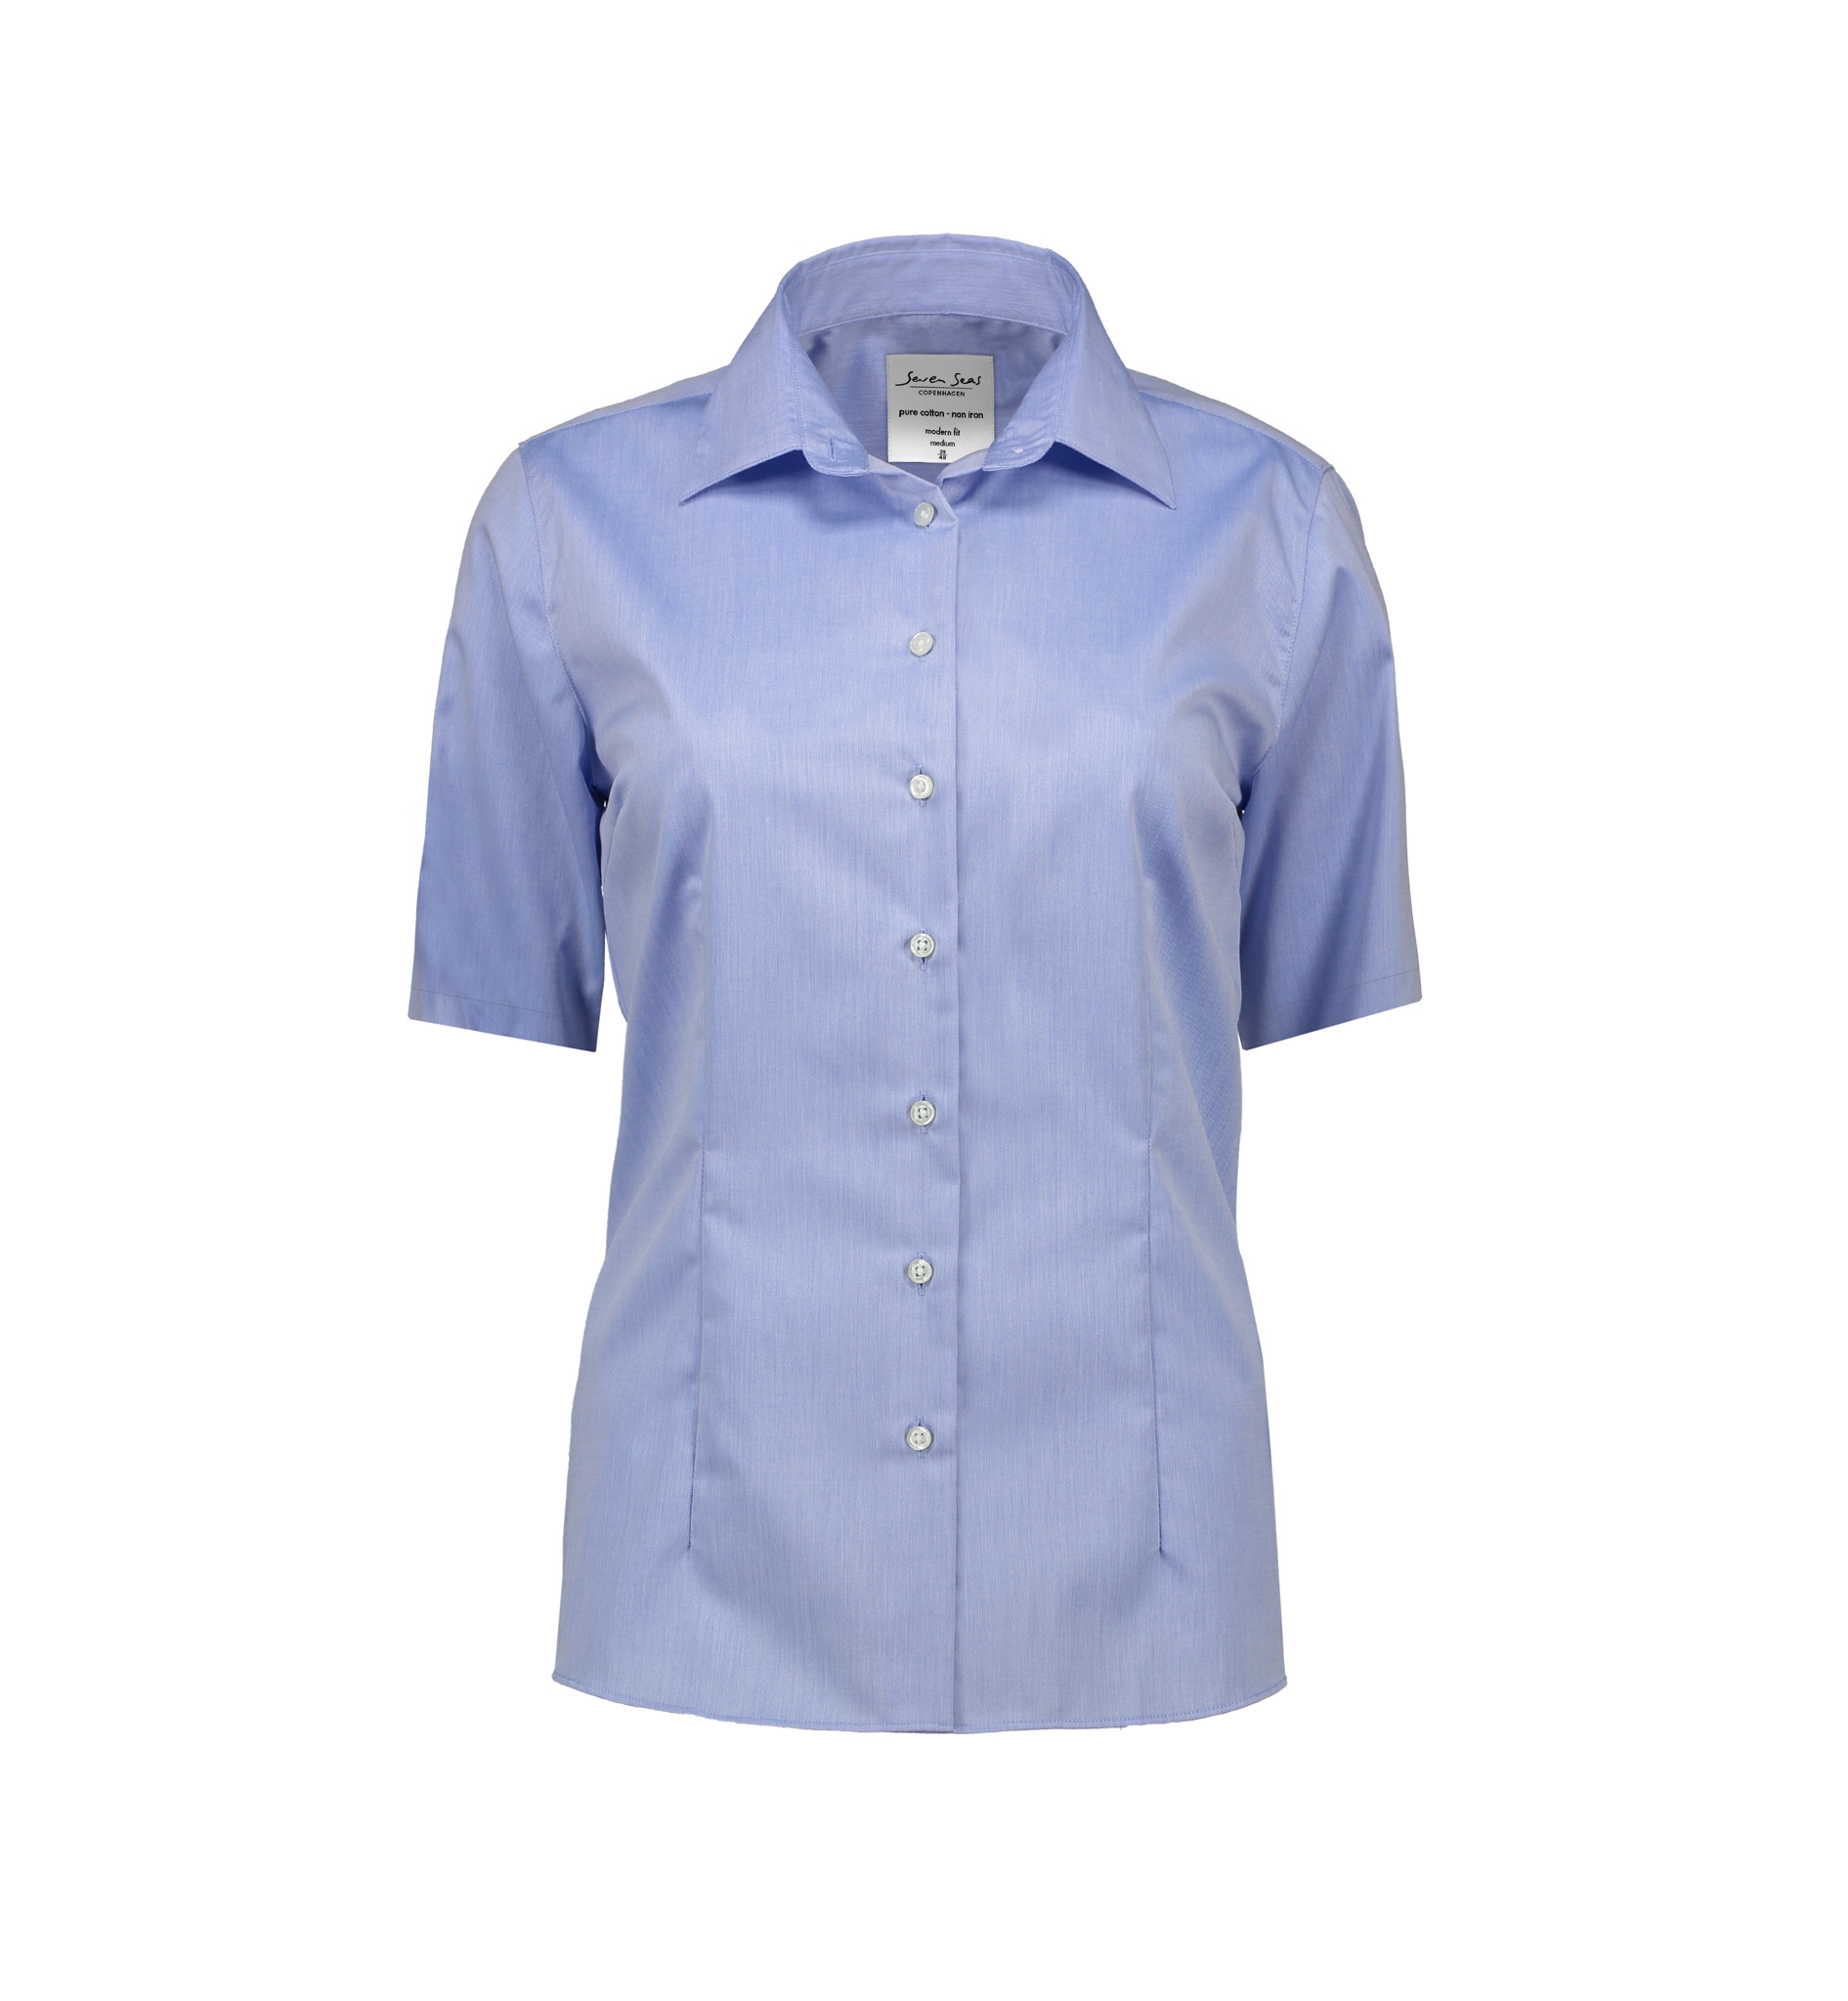 Picture of Fine twill short sleeve men's shirt